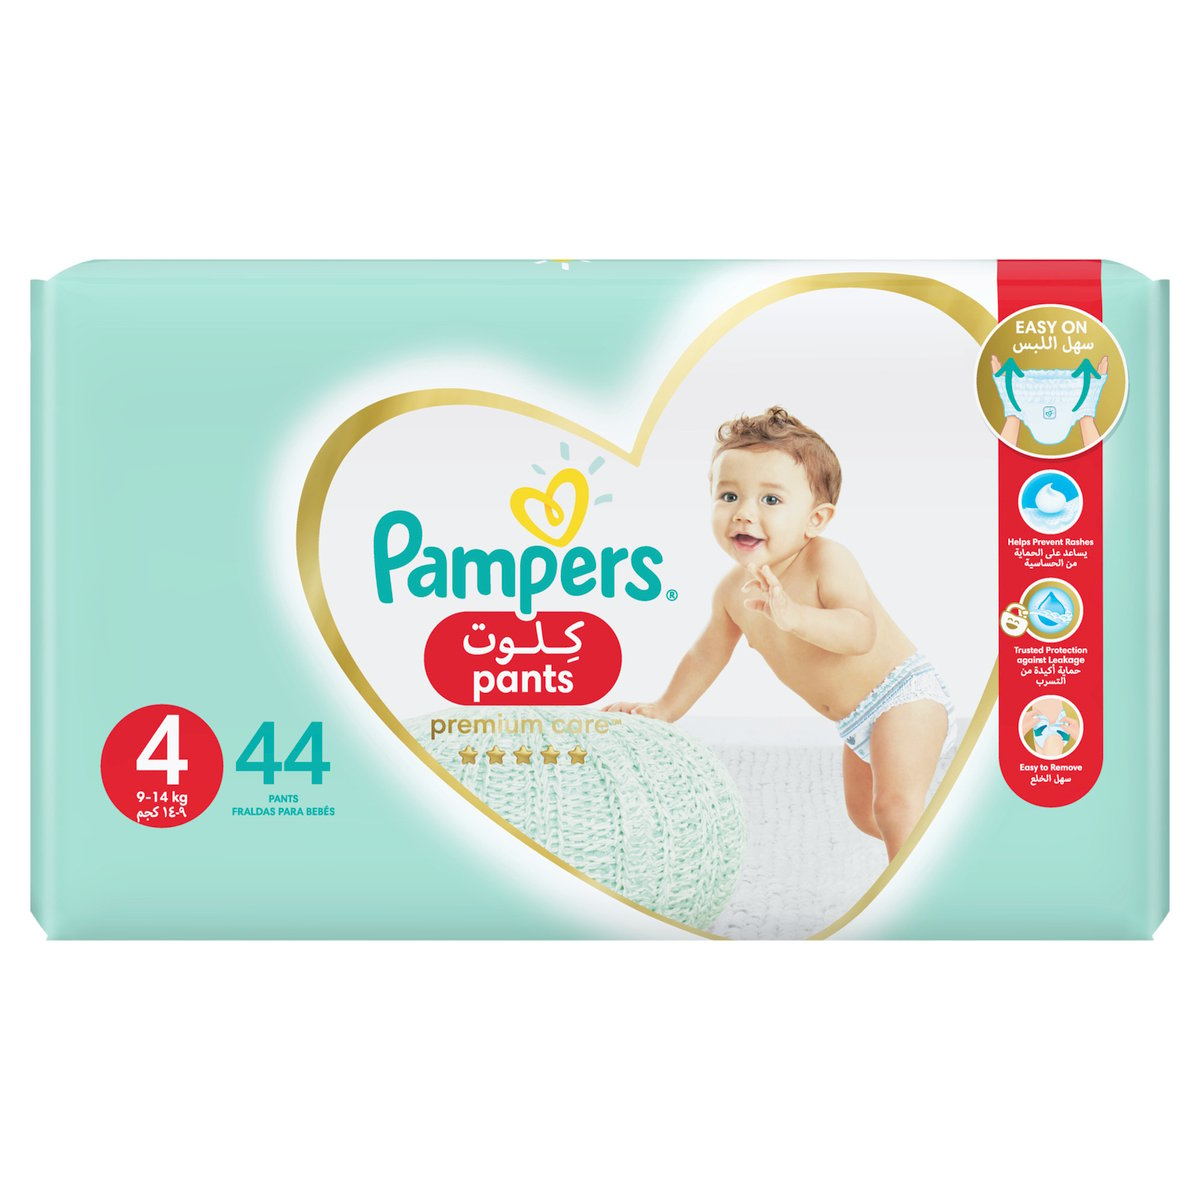 Pampers Pants Diapers Size 4 44 Diapers